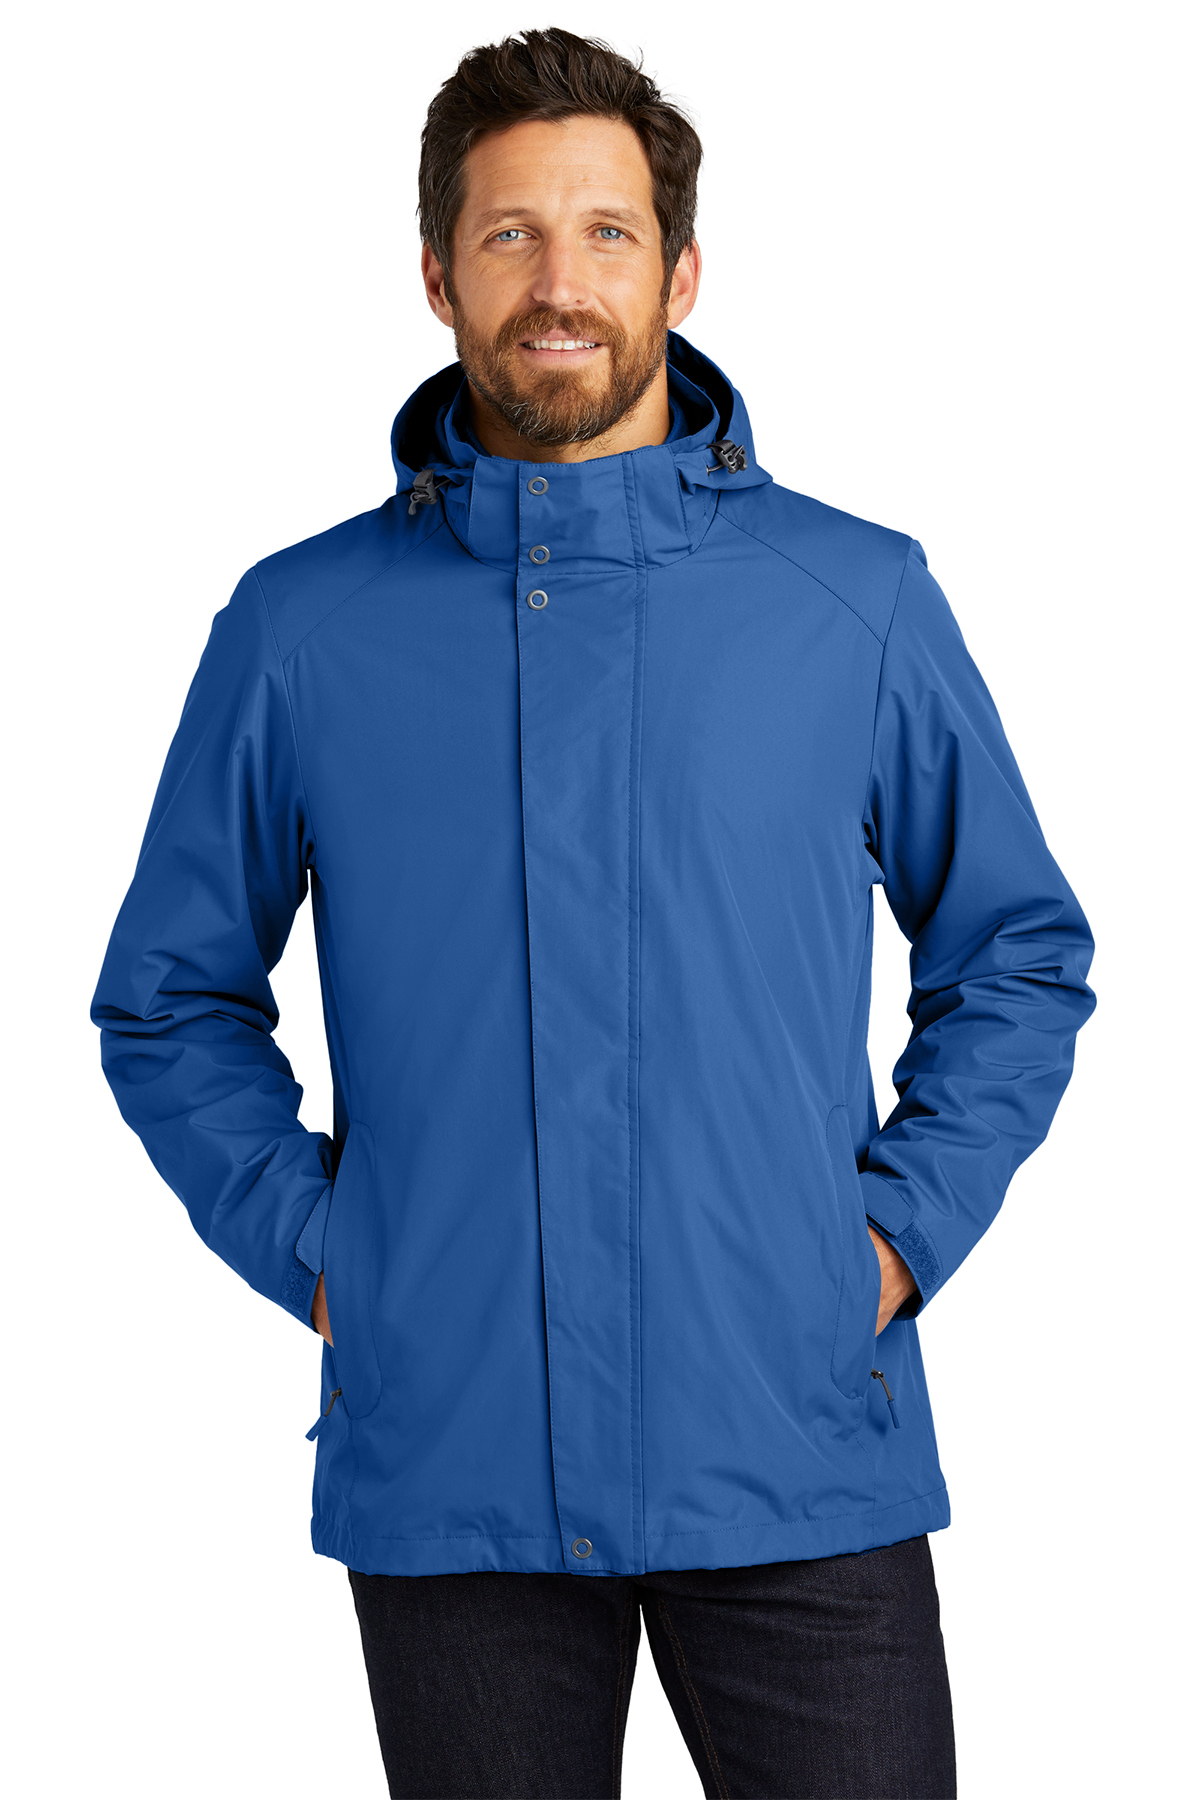 Port Authority All-Weather 3-in-1 Jacket | Product | Port Authority